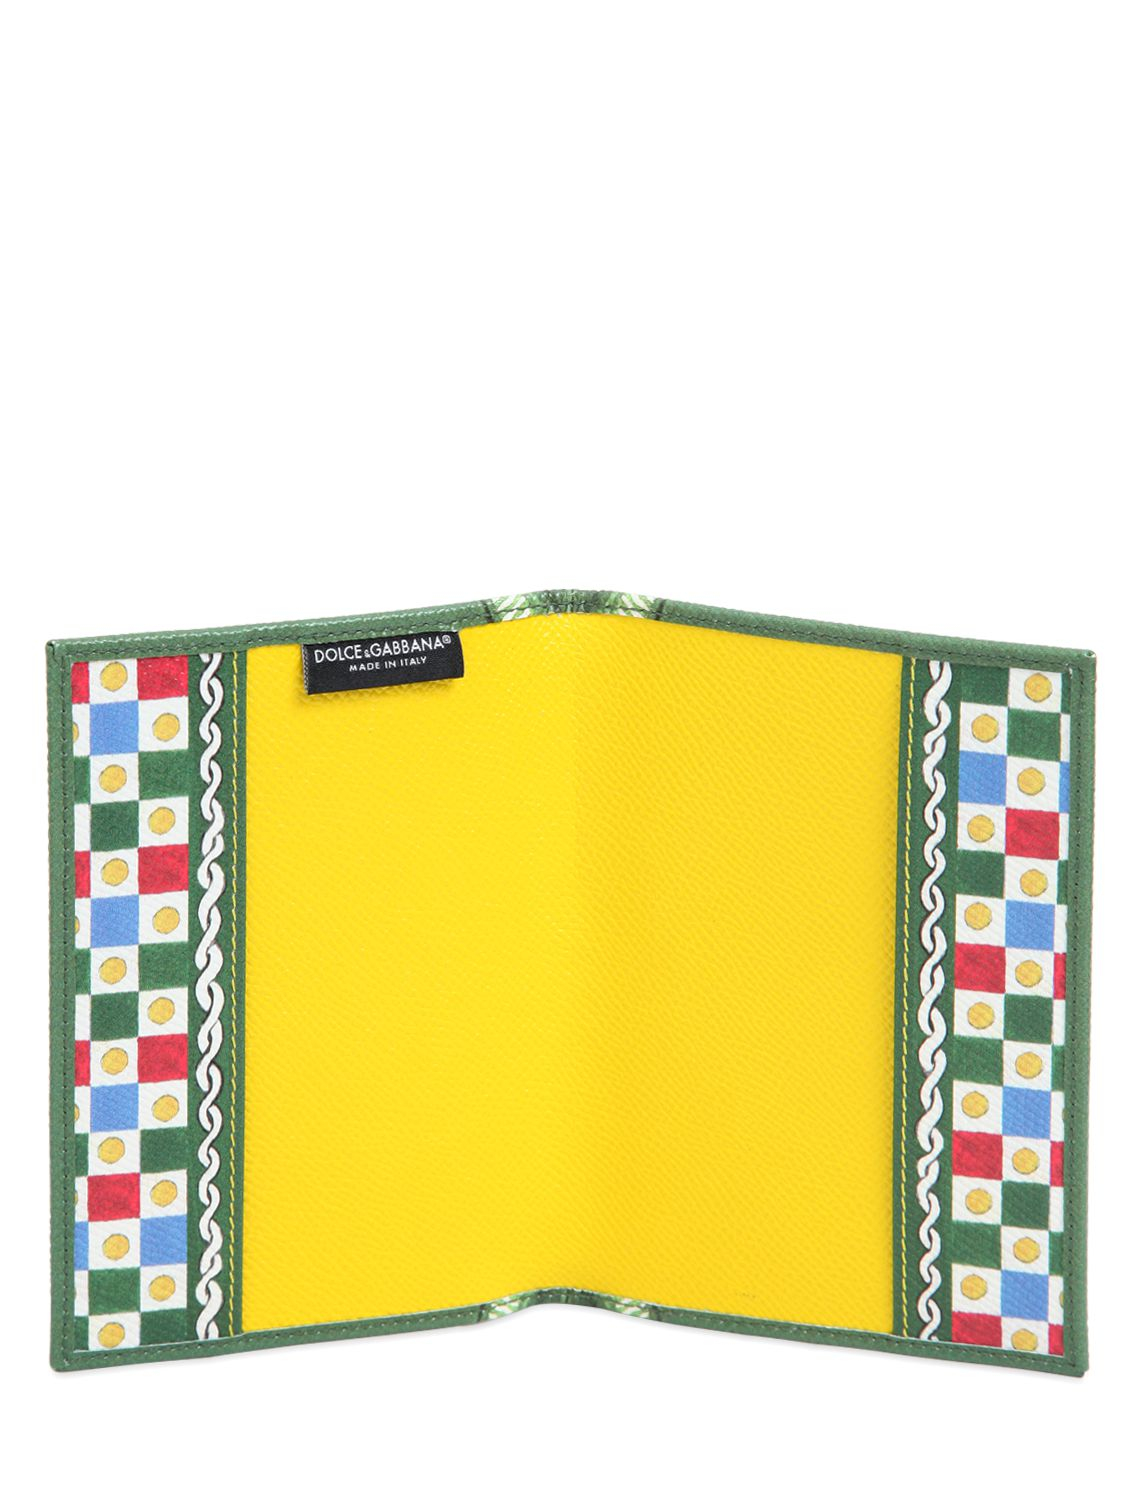 dolce and gabbana passport cover